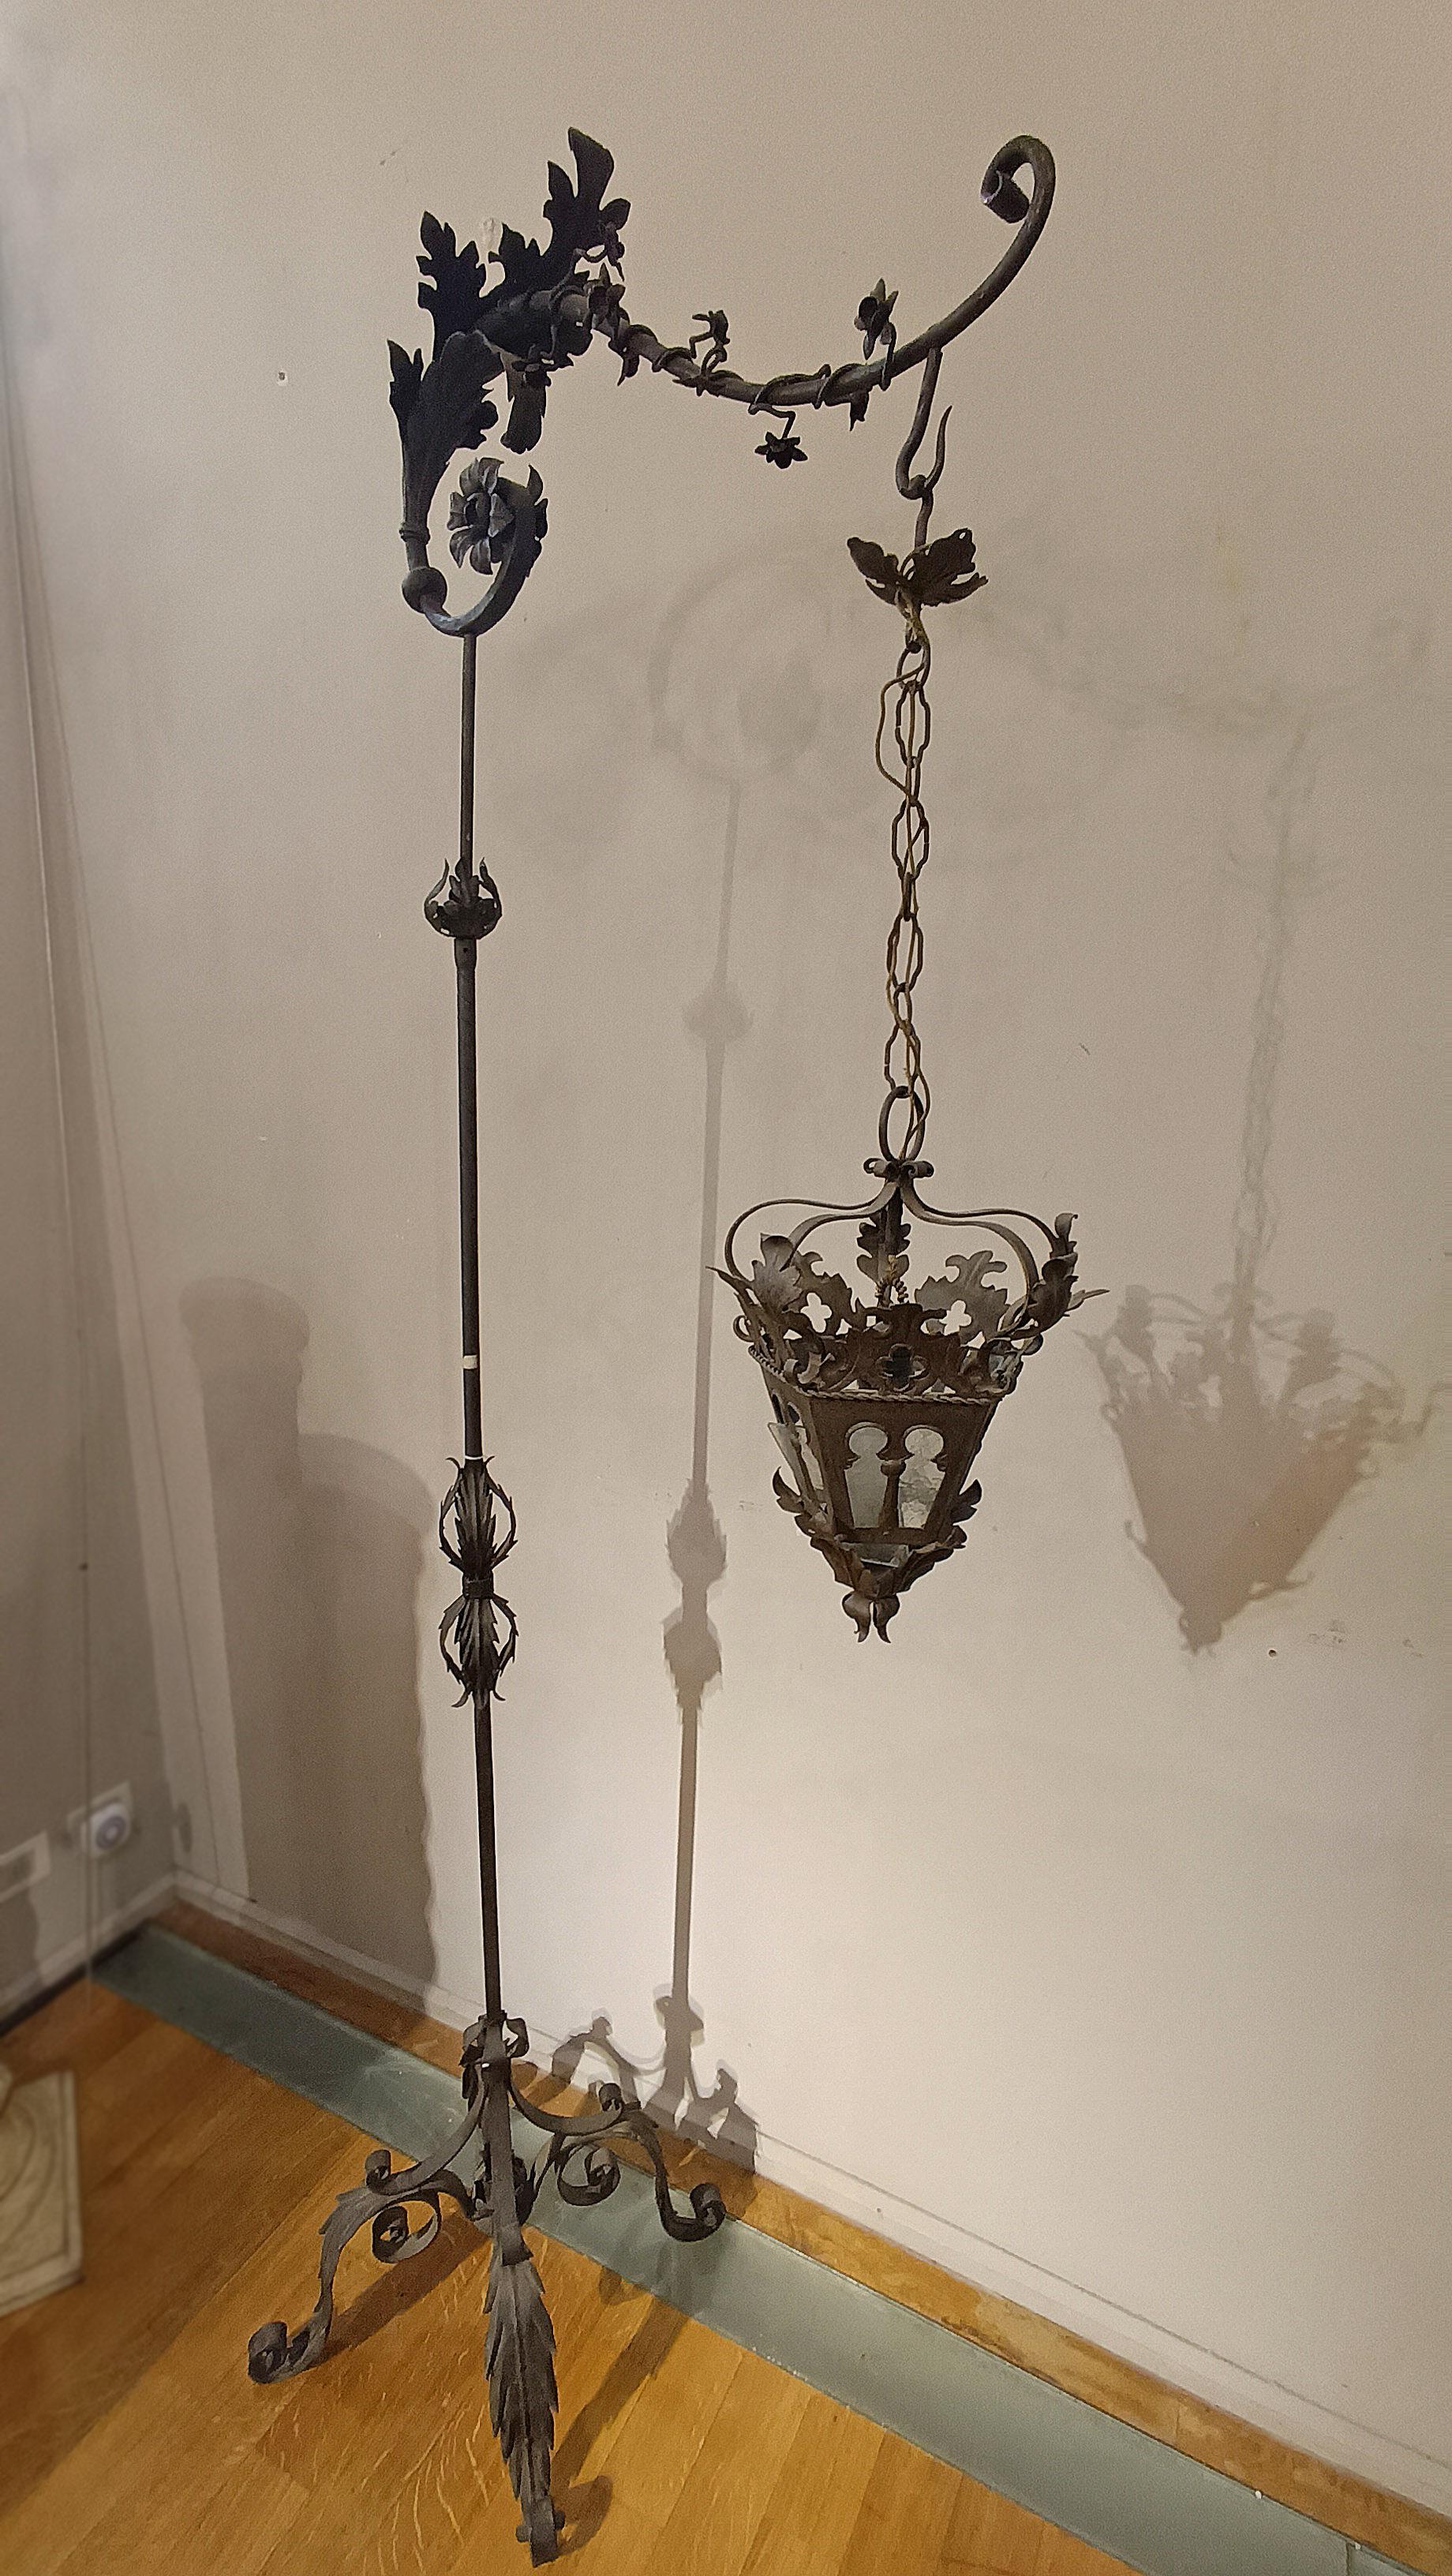 Characteristic and elegant hand-forged iron lantern holder. Its structure allows you to raise or lower the lantern as needed. The arm is rotatable, decorated with splendid vegetal racemes and supports the lantern, also decorated with vegetal details